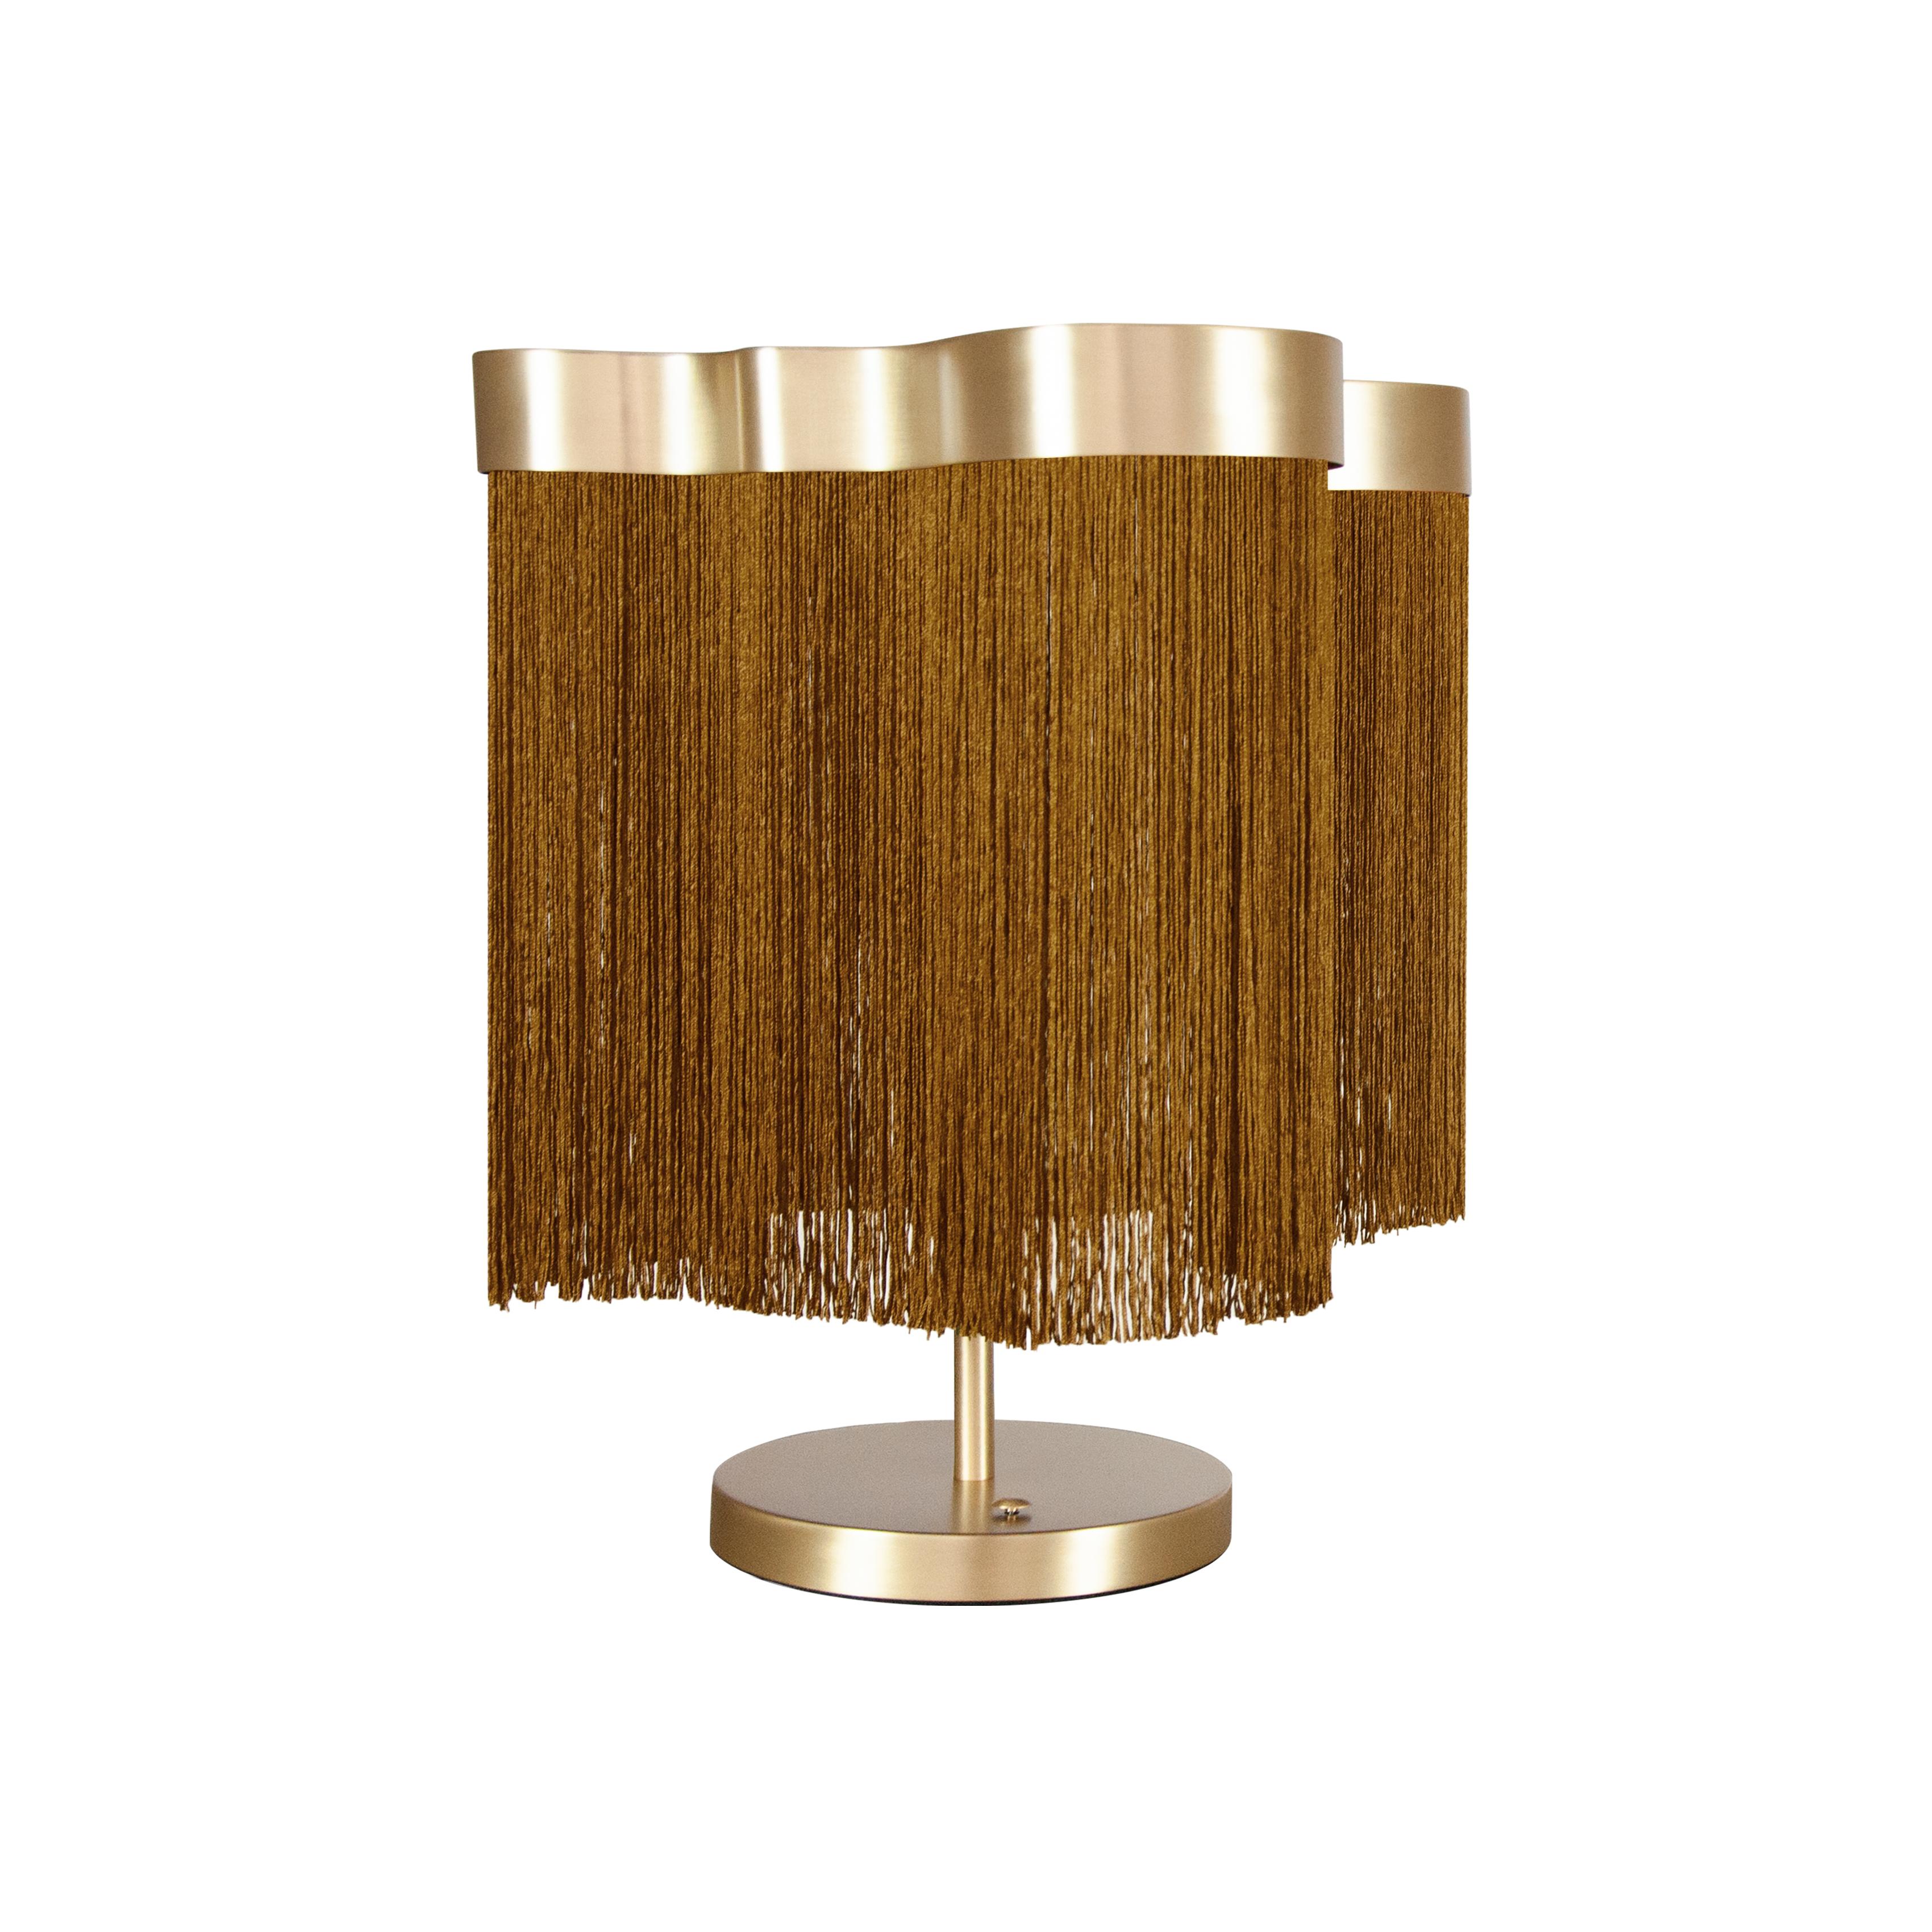 Arcipelago Maiorca Dimmable Table Lamp in Satin Brass with Cognac Color For Sale